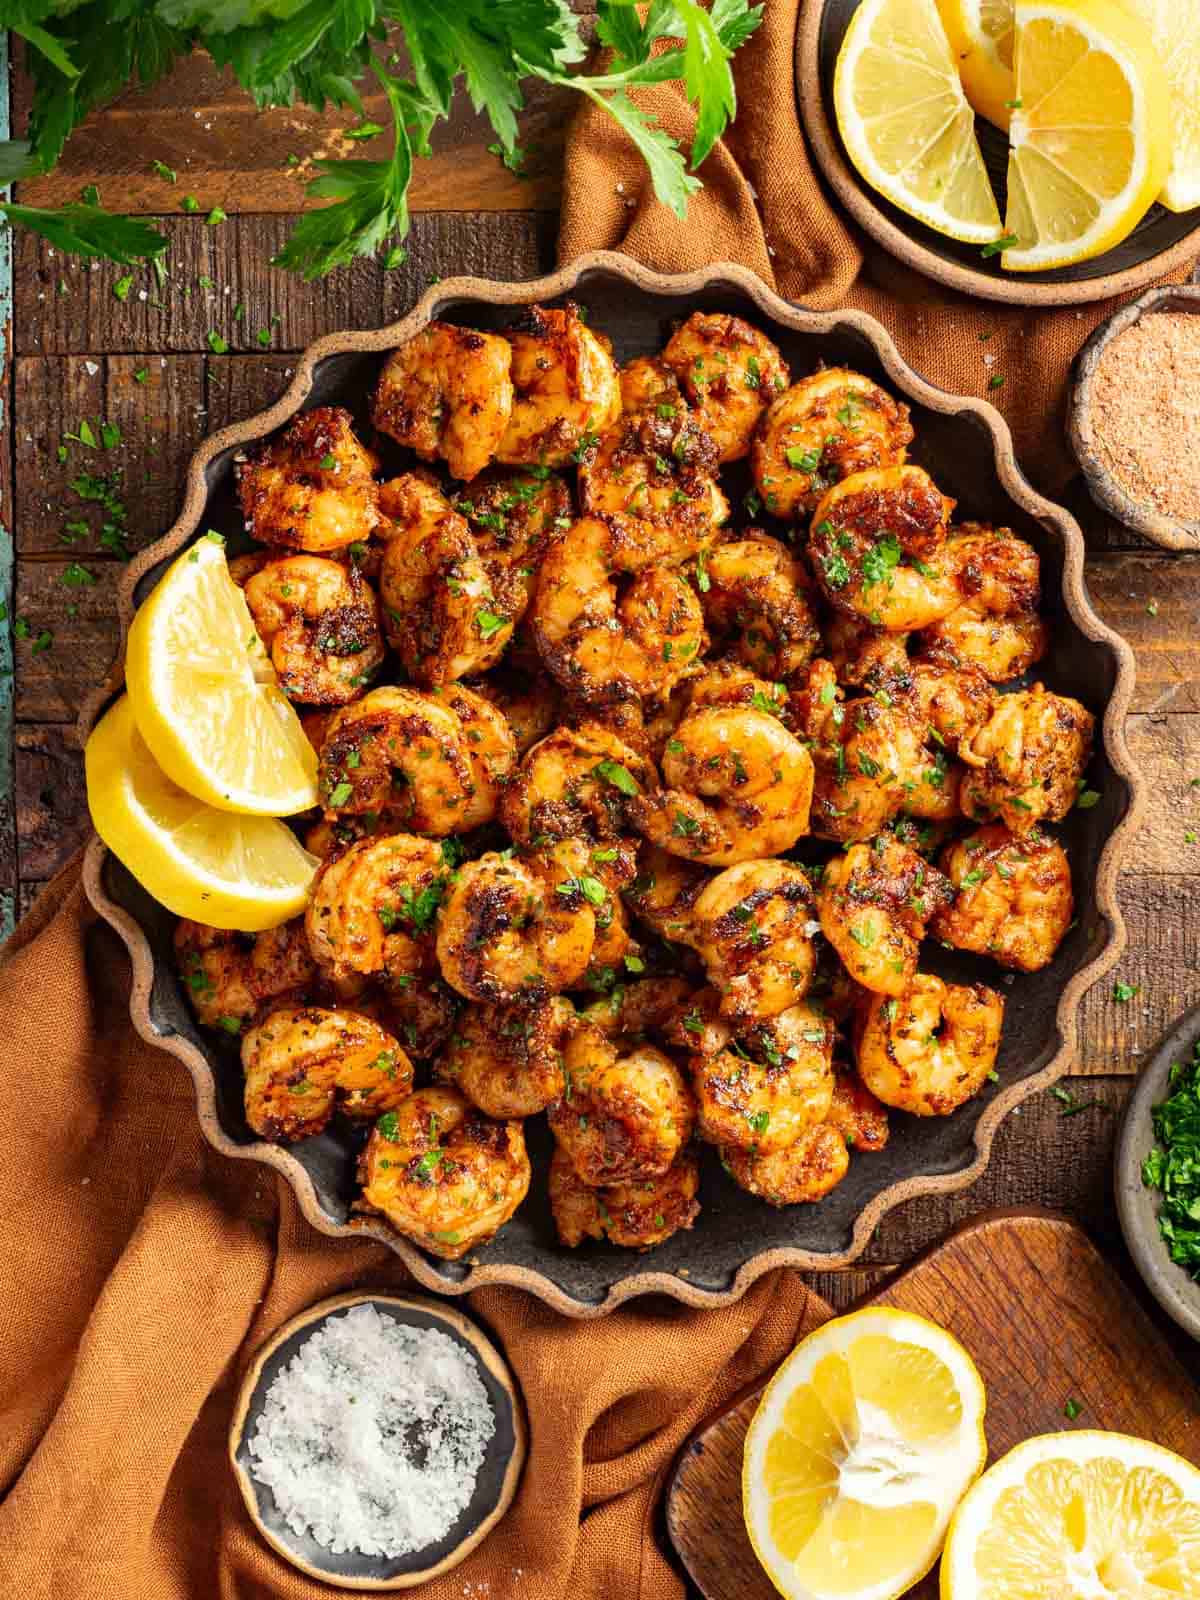 https://laurenfromscratch.com/wp-content/uploads/2023/07/A-plate-of-blackened-shrimp-topped-with-lemon-and-parsley.jpg